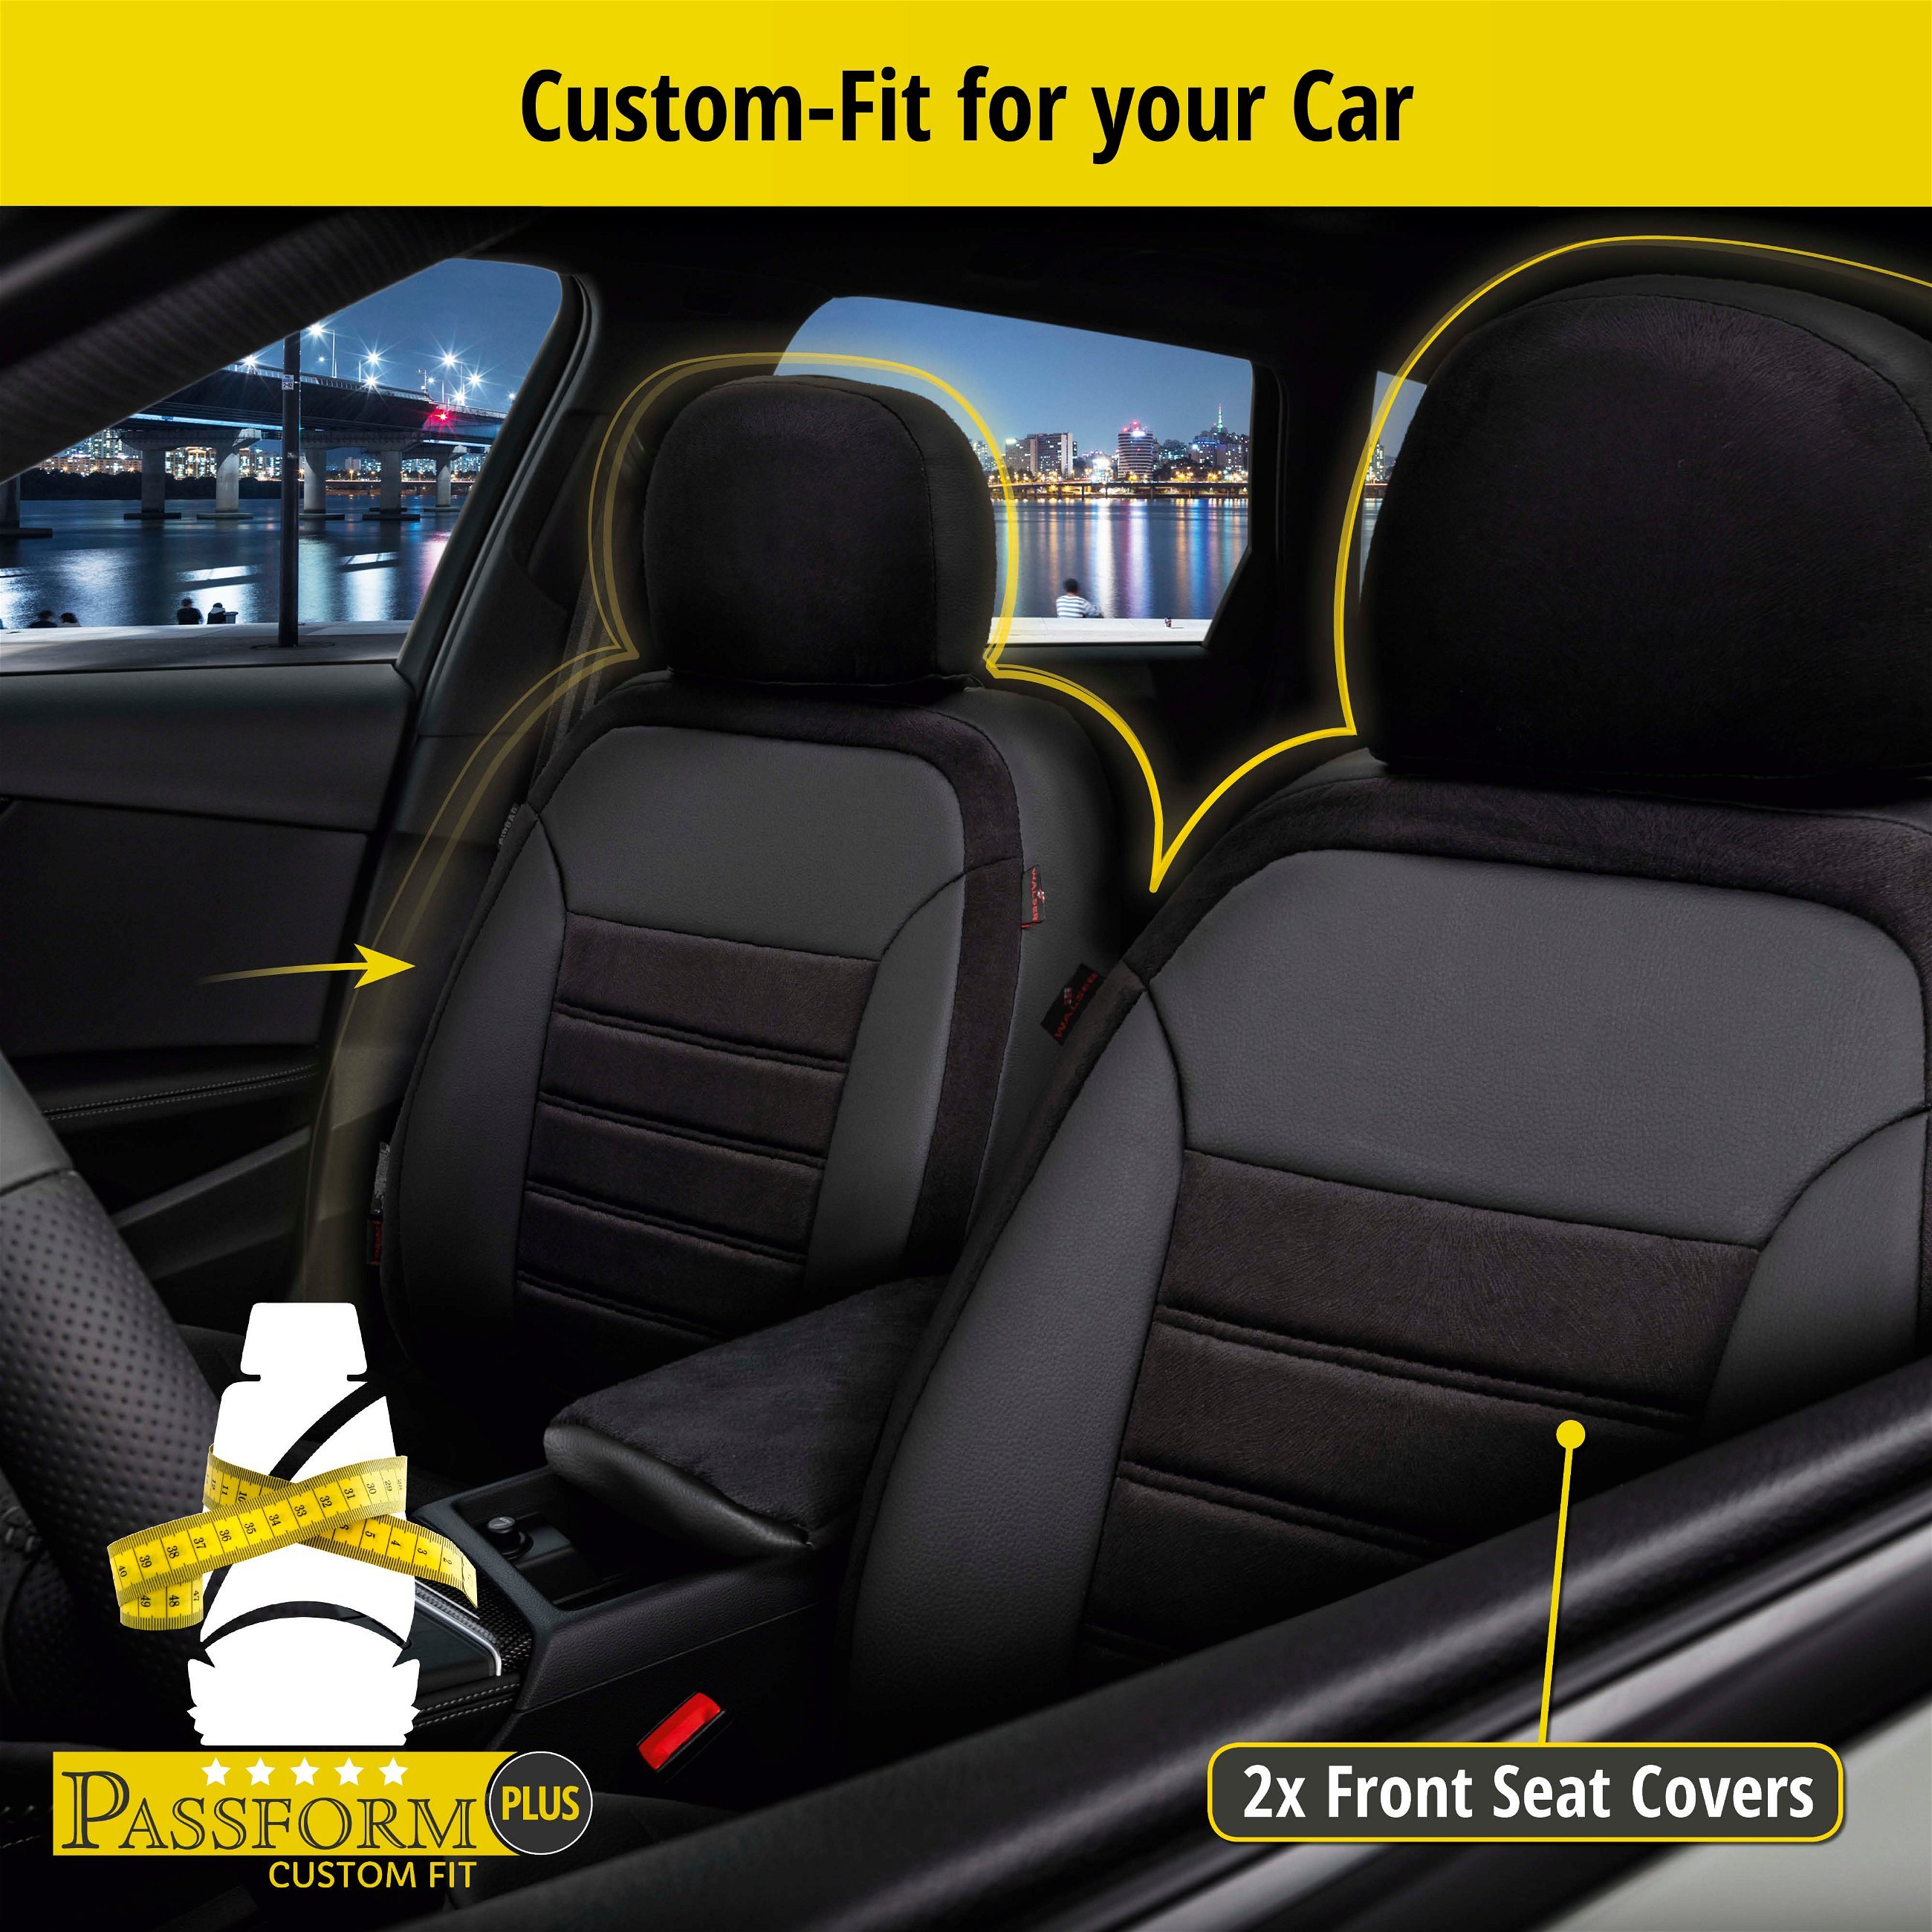 Seat Cover Bari for VW Touran (1T1, 1T2) 02/2003-05/2010, 2 seat covers for normal seats